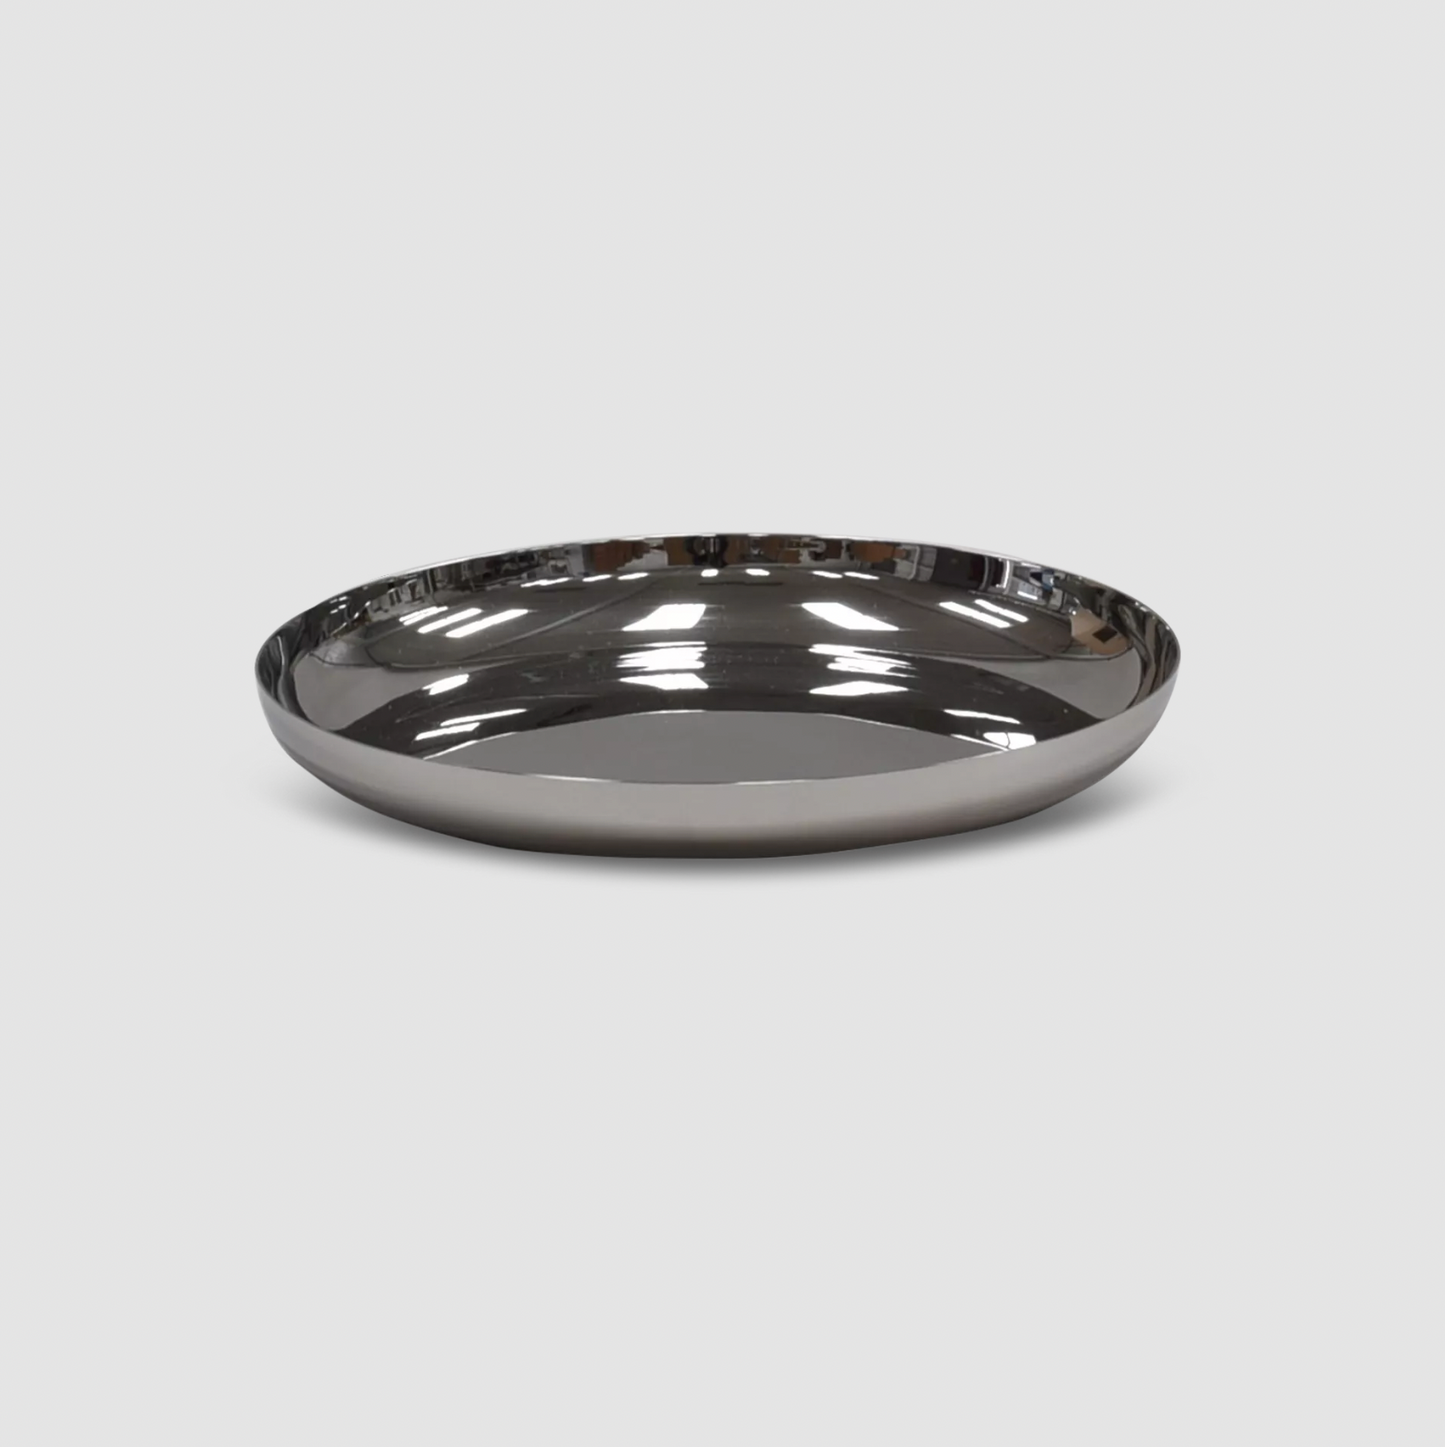 MODERN Large Plate in Stainless Steel